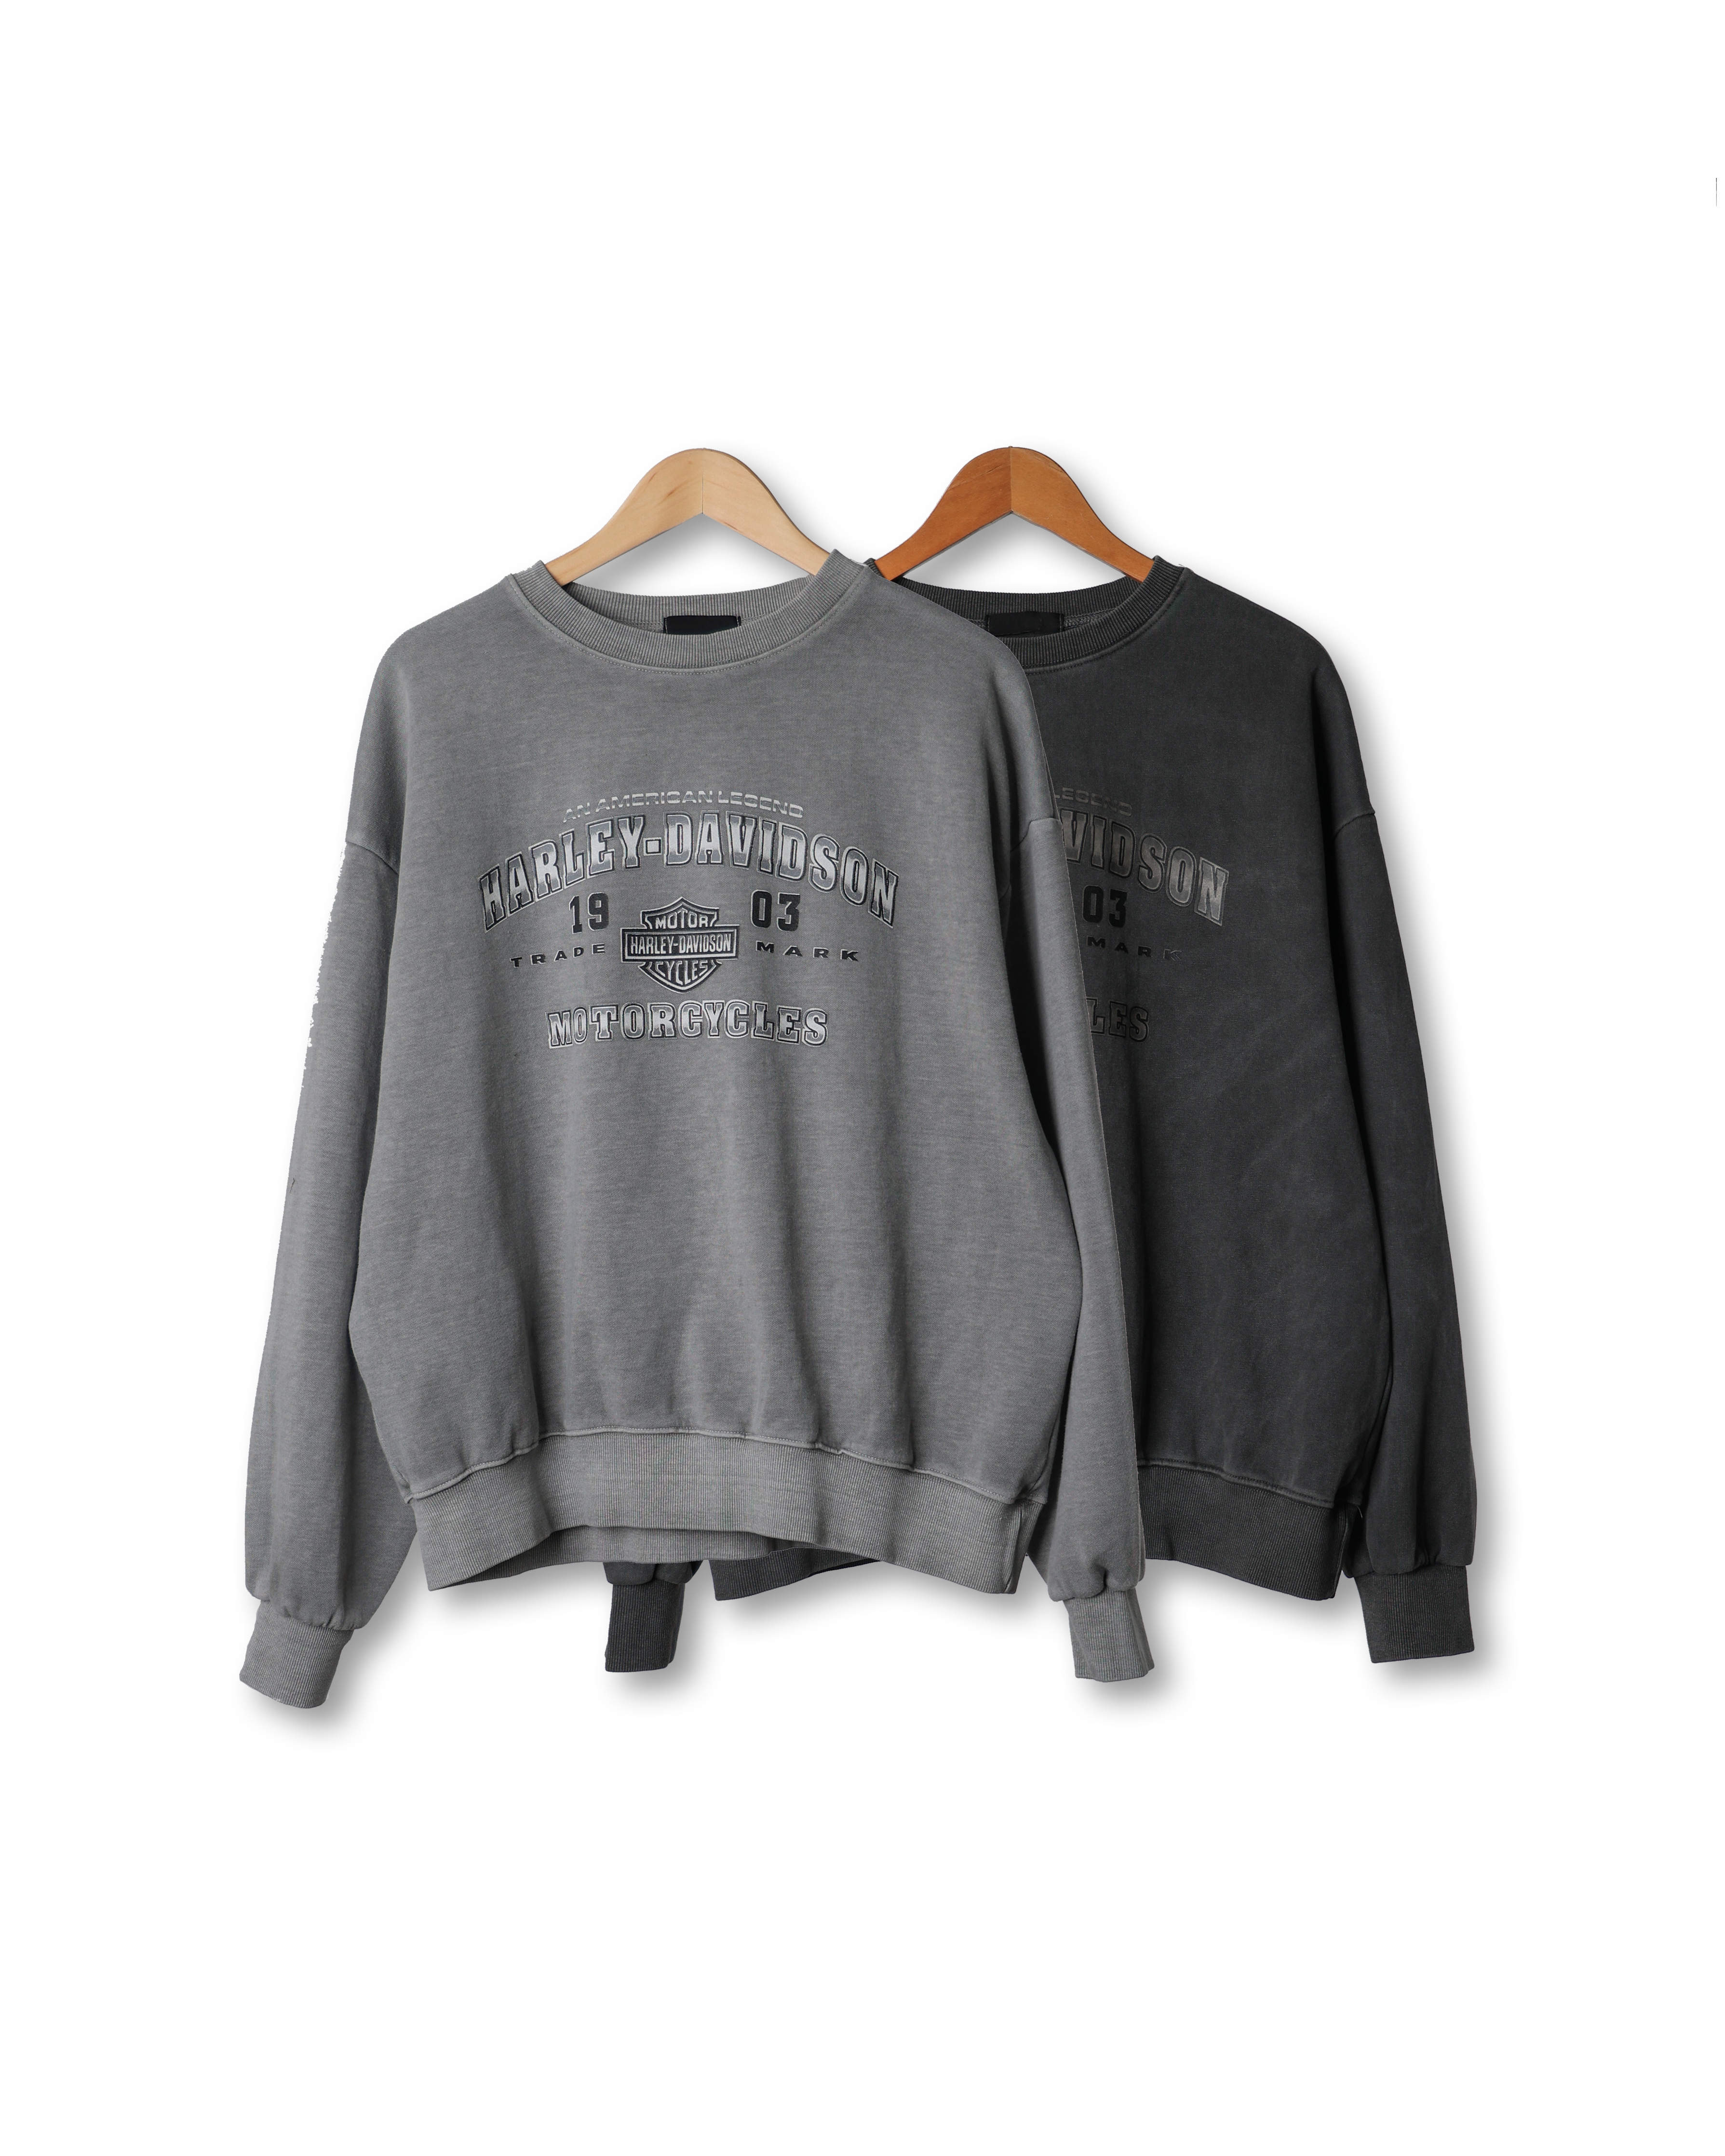 TRIZER HARLEY Pigments Over Sweat Shirts (Charcoal/Gray)